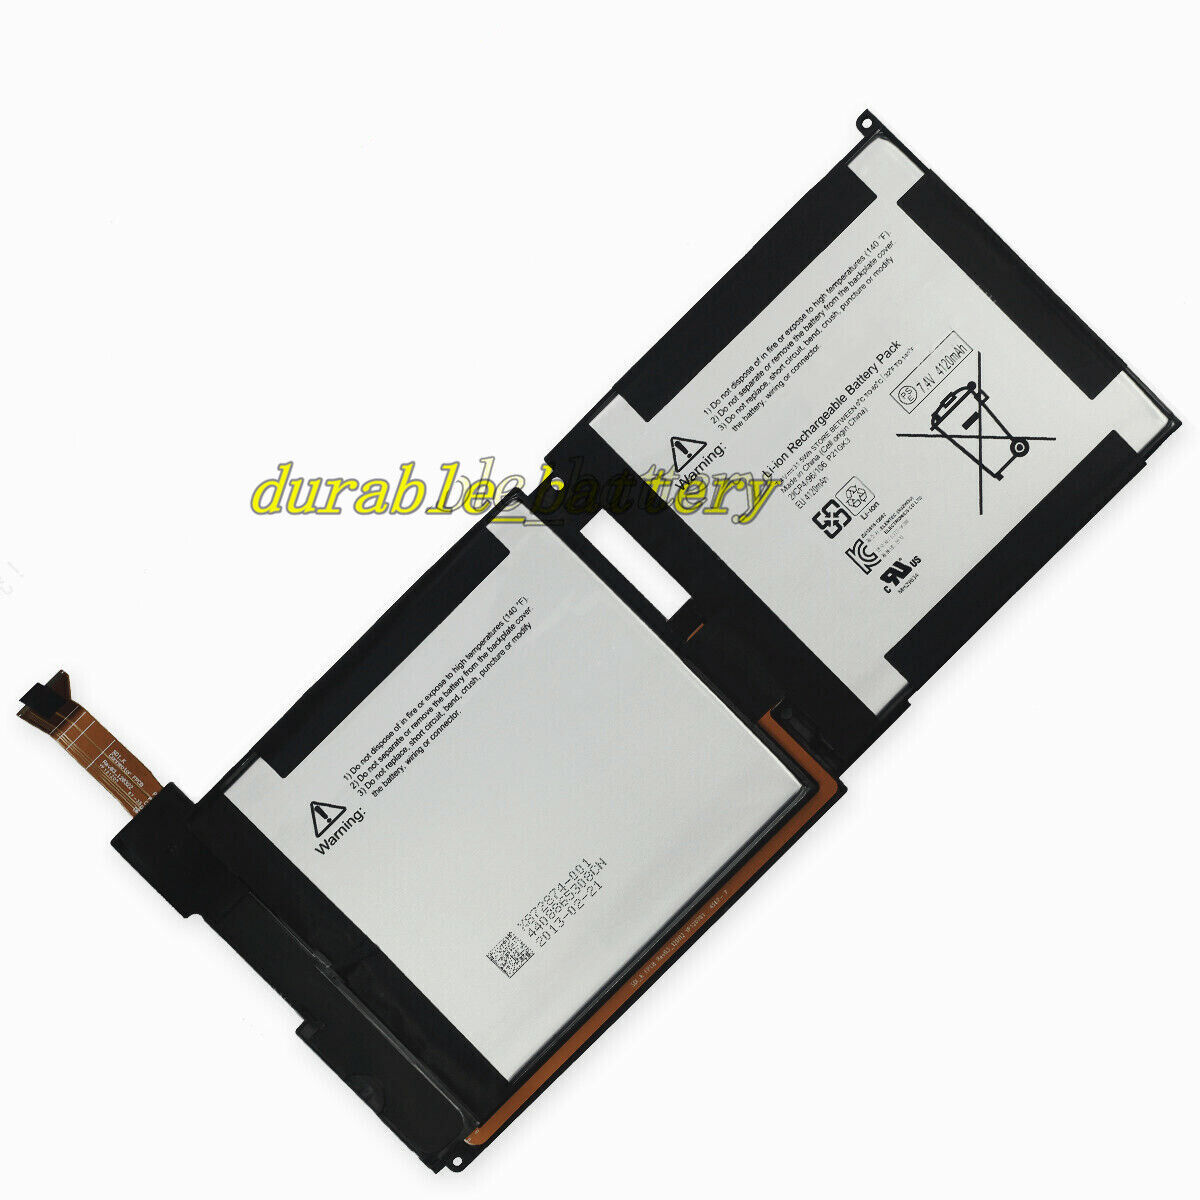 Replacement Battery For Microsoft Surface RT 2 Surface Pro 1 2 3 4 5 6 7 Series